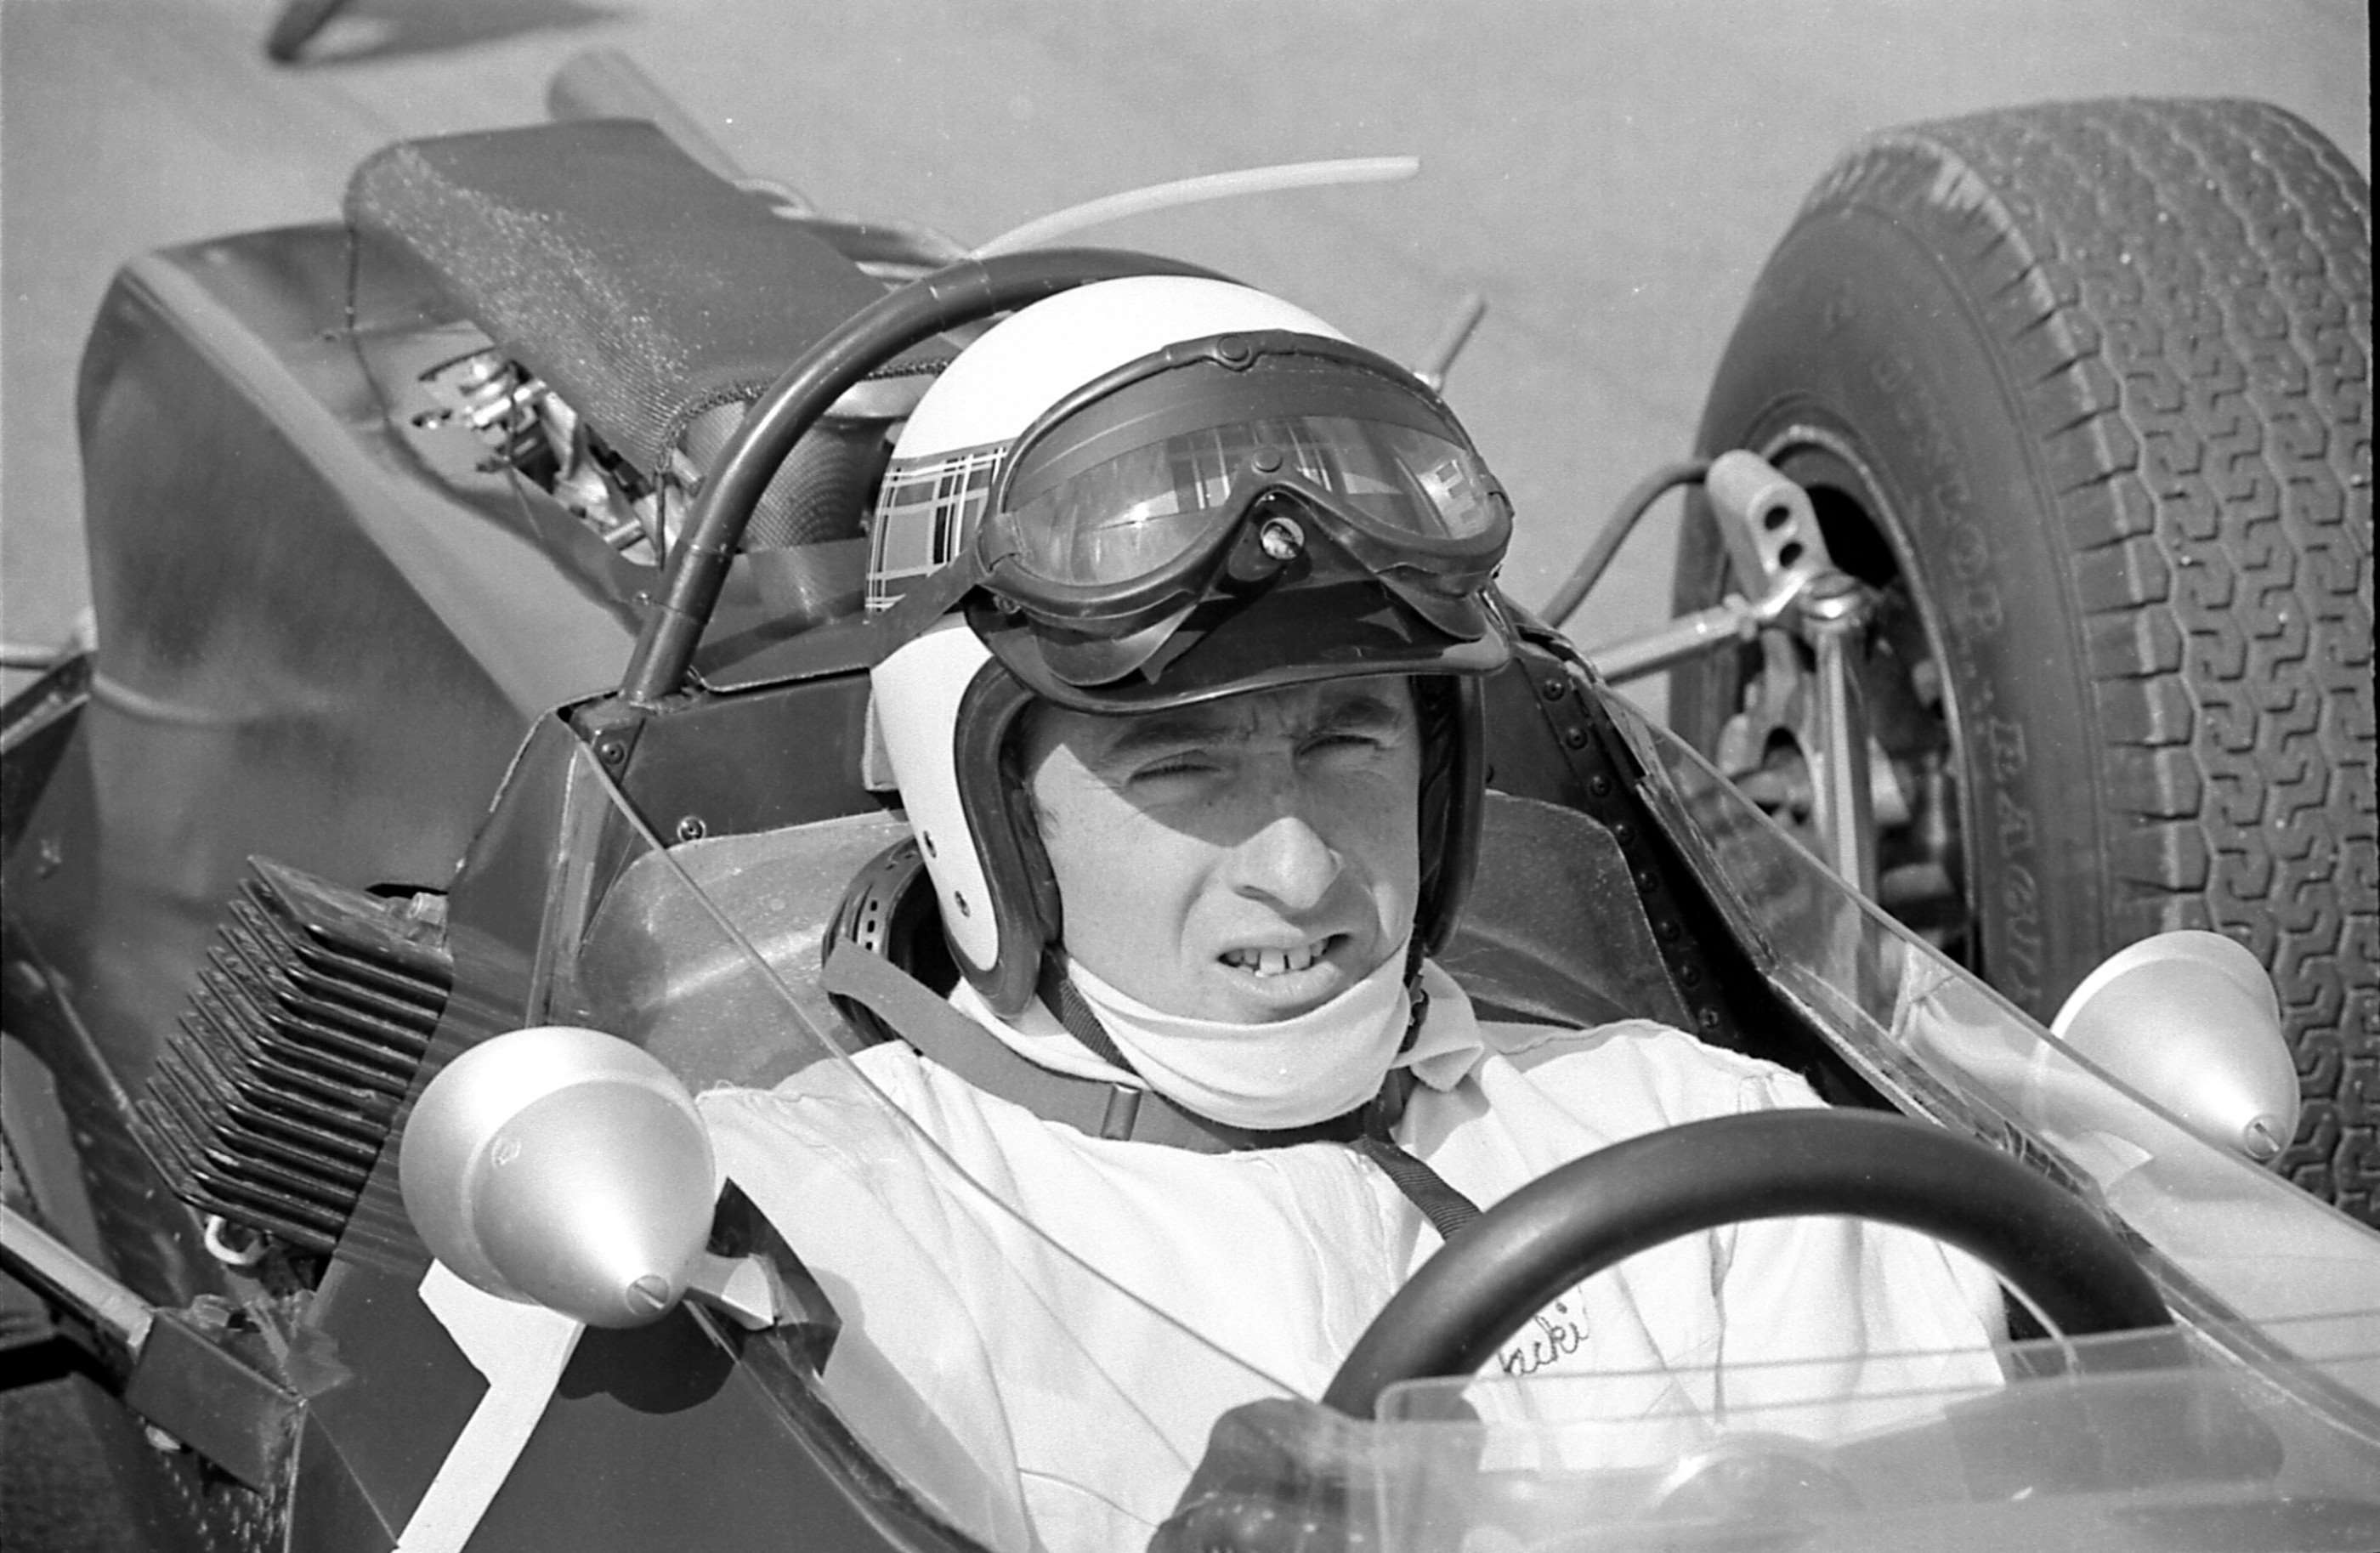 On his final appearance at Goodwood, in the 1966 Formula 2 race - even Jackie Stewart was not wearing seat belts. He later became their prime advocate - and helped save many lives.